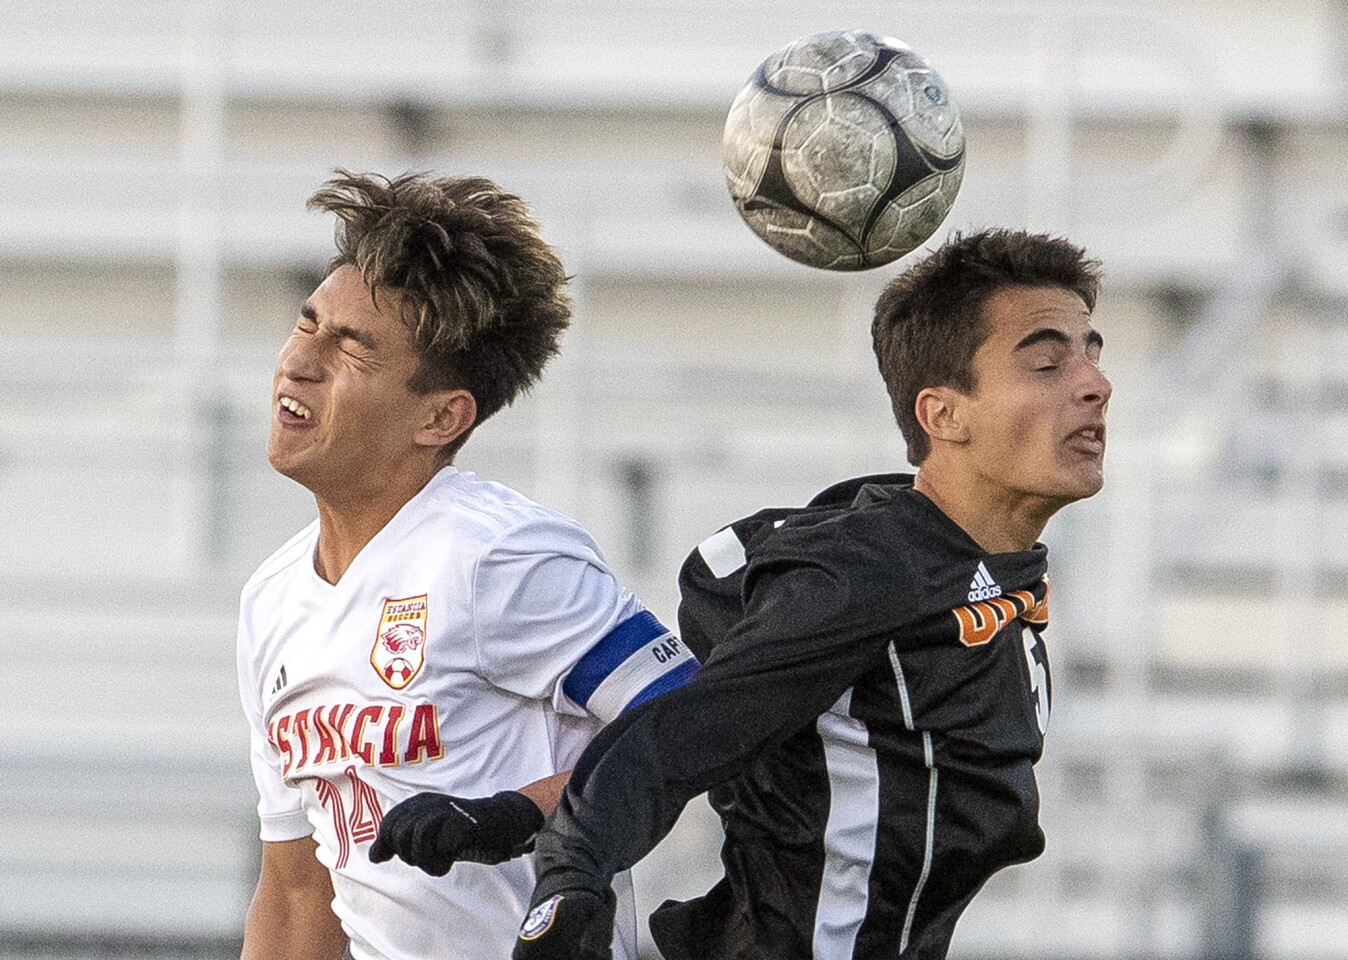 Estancia High's Brian Alvarez, left, goes up for a header against Huntington Beach's Jason Gunn during the first round of the CIF Southern Section Division 2 playoffs at Cap Sheue Field on Thursday.